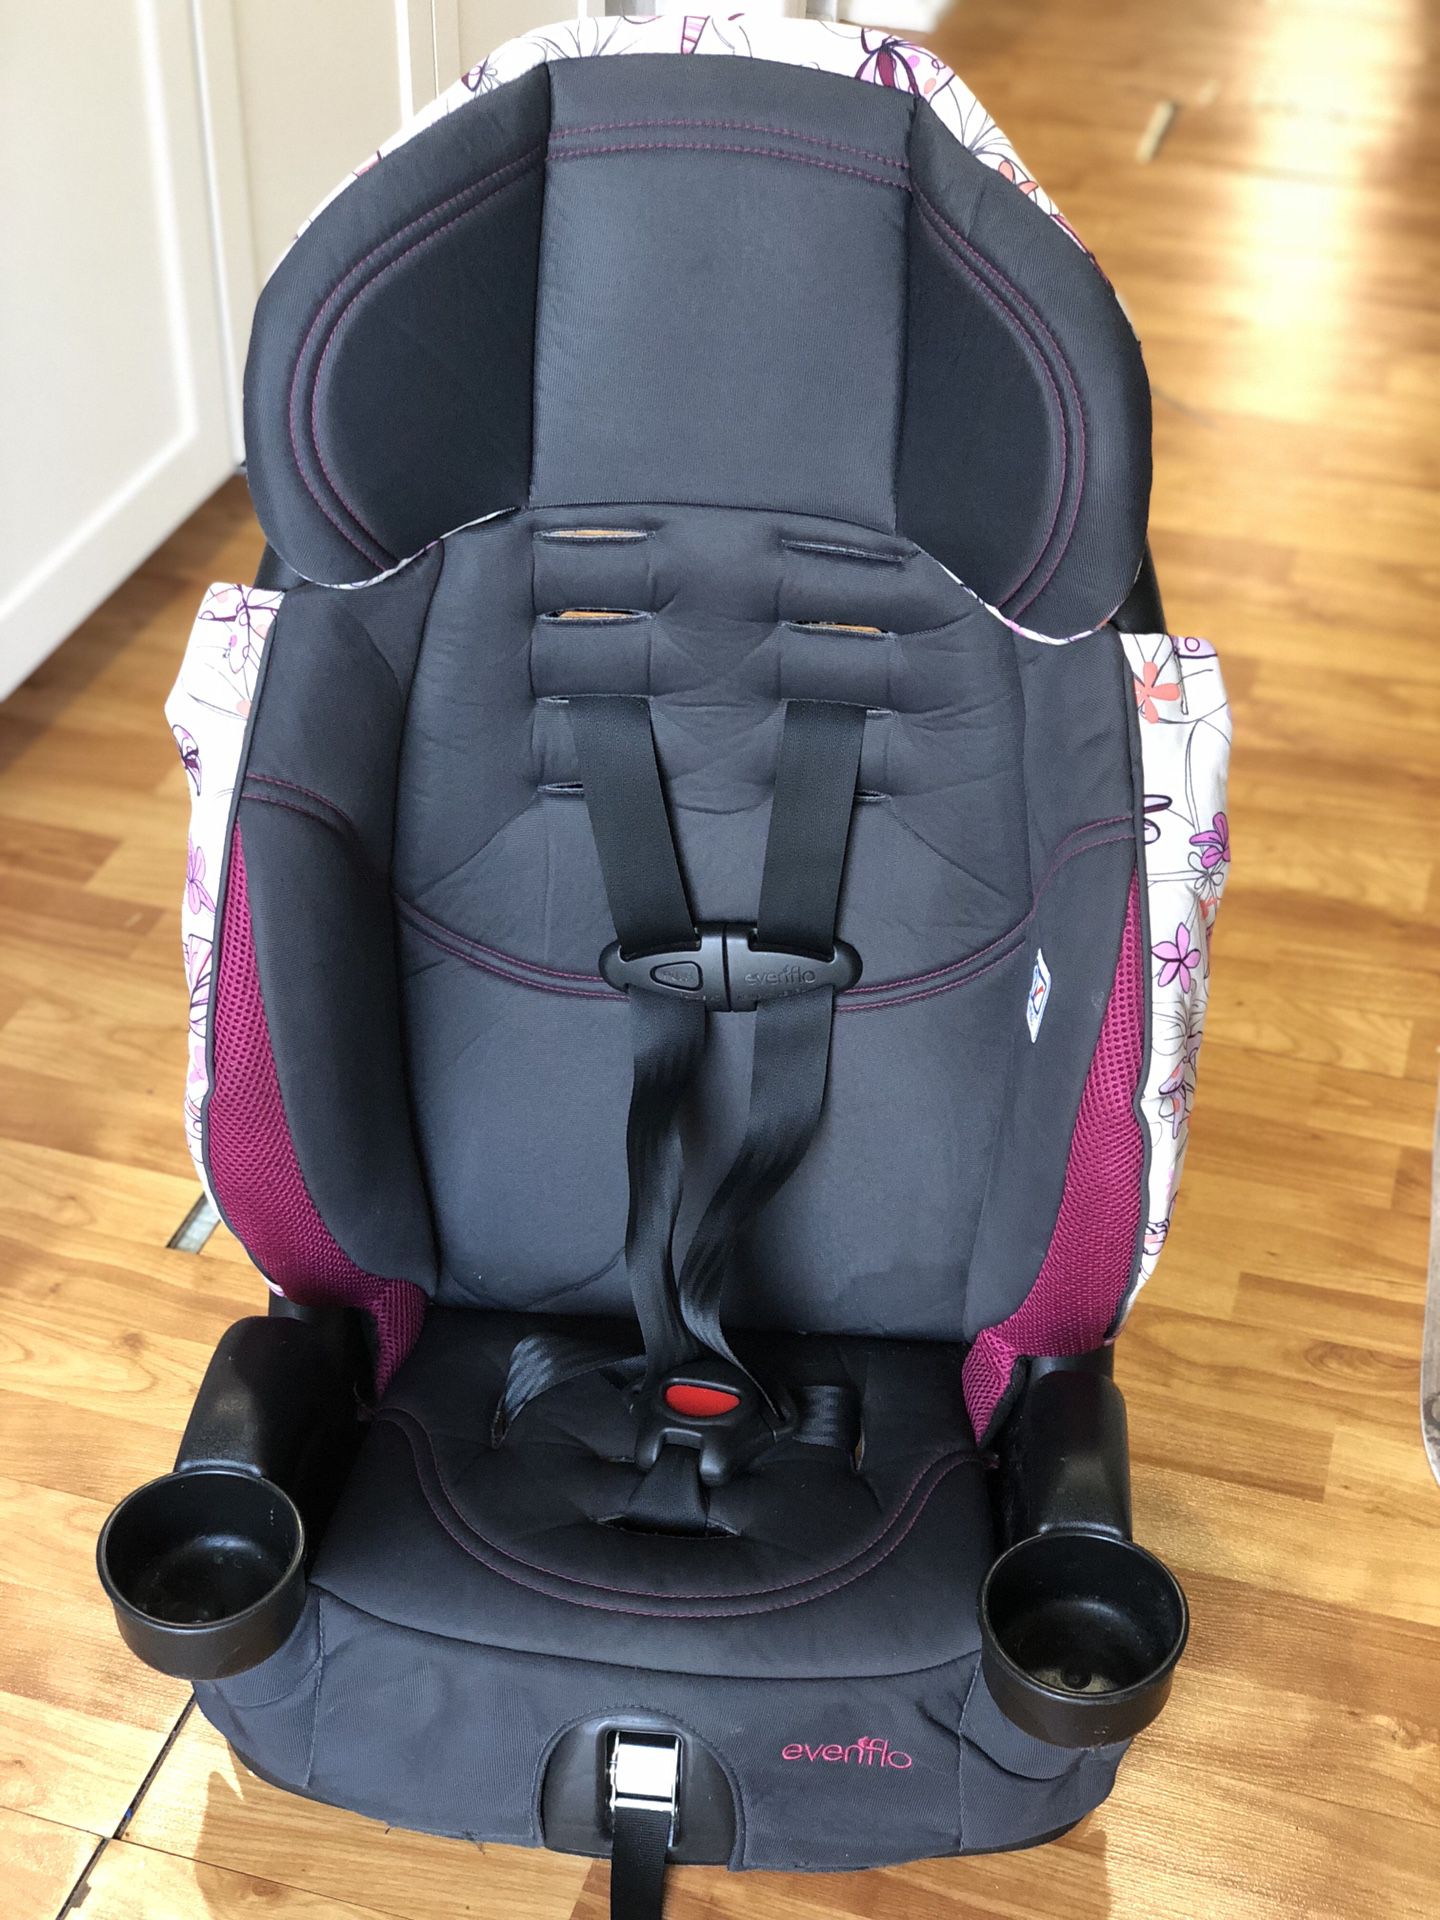 Evenflo high back booster seat